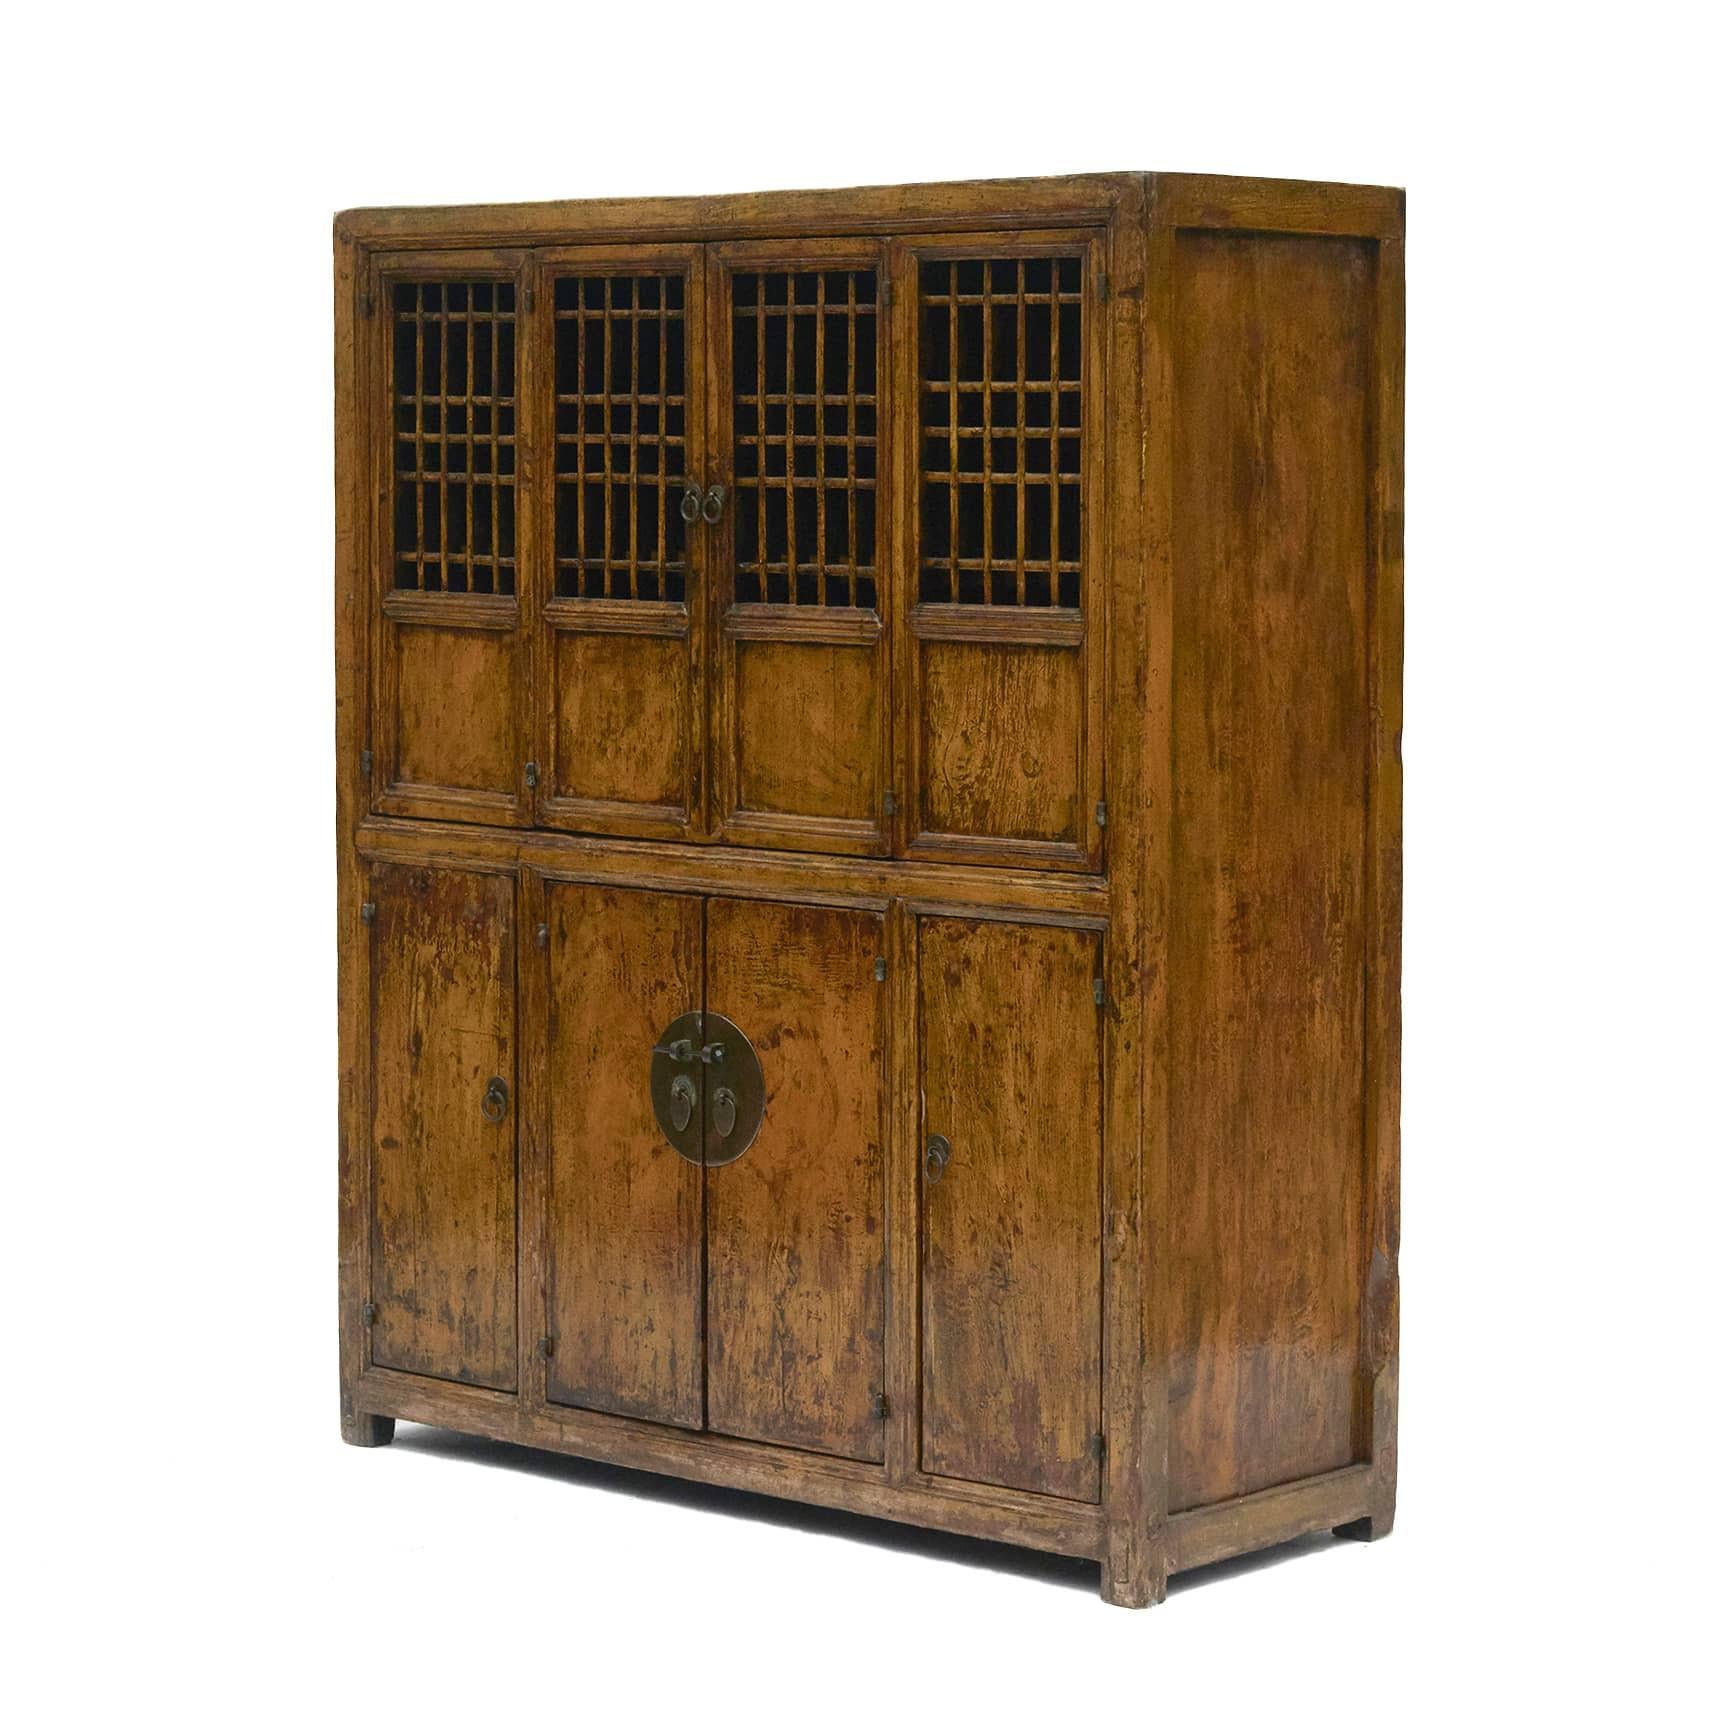 Cabinet in original dark yellow lacquer with beautiful age-related patina.

The top a pair of doors with bars, opens up double, bottom with four doors.

Original cabinet with patina highlighted by a clear lacquer surface finish.

Shandong